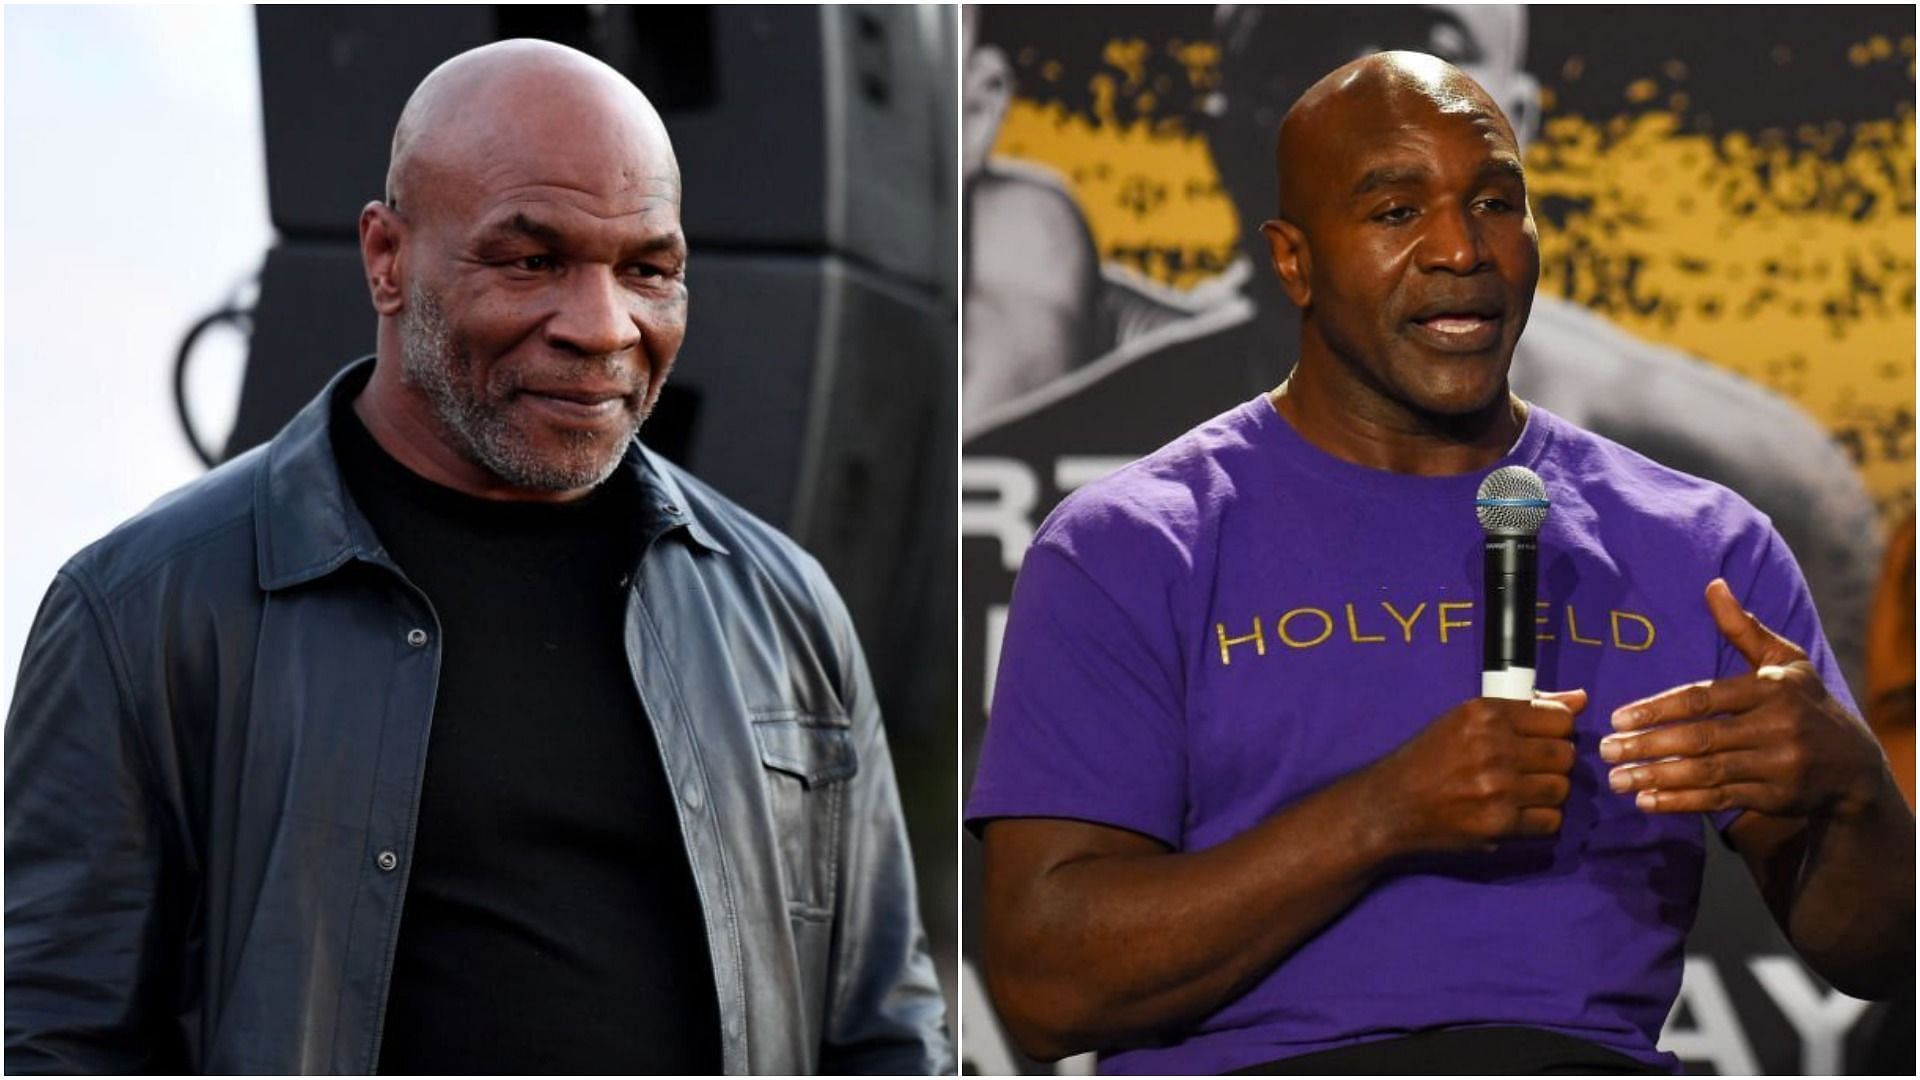 Mike Tyson bit Evander Holyfield&#039;s ear in a boxing match back in 1997 (Images via JC Olivera and Eric Espada/Getty Images)